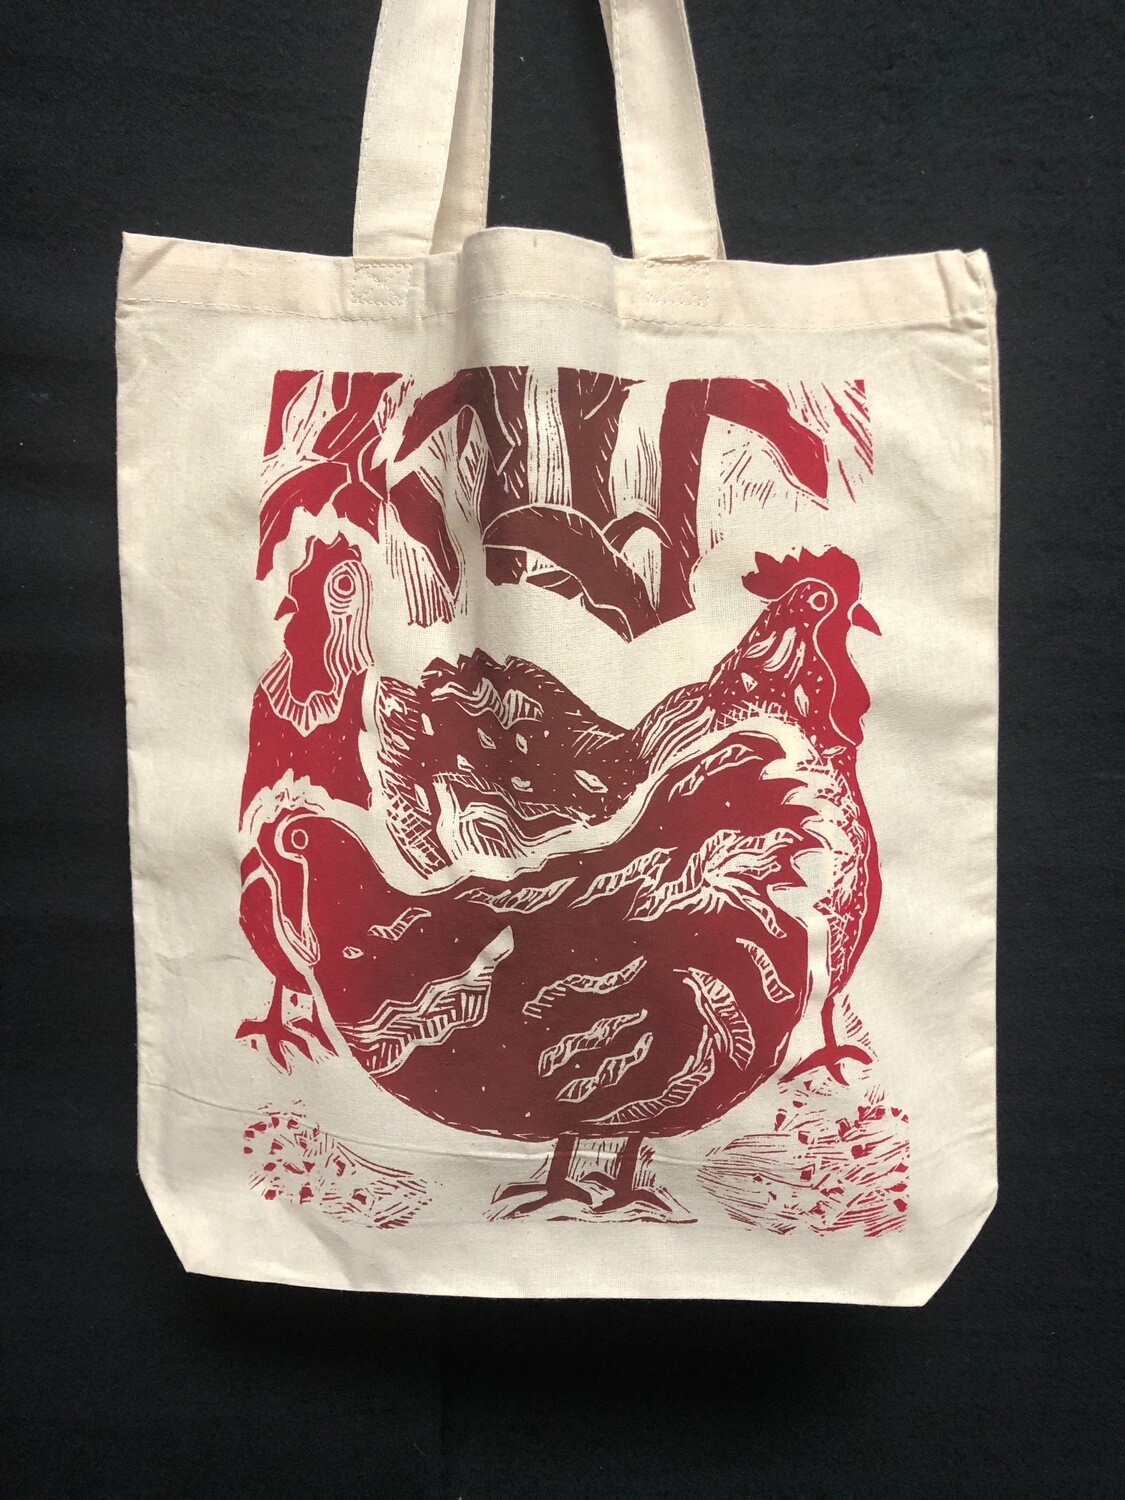 Teodoro's Chickens hand printed tote bag-red